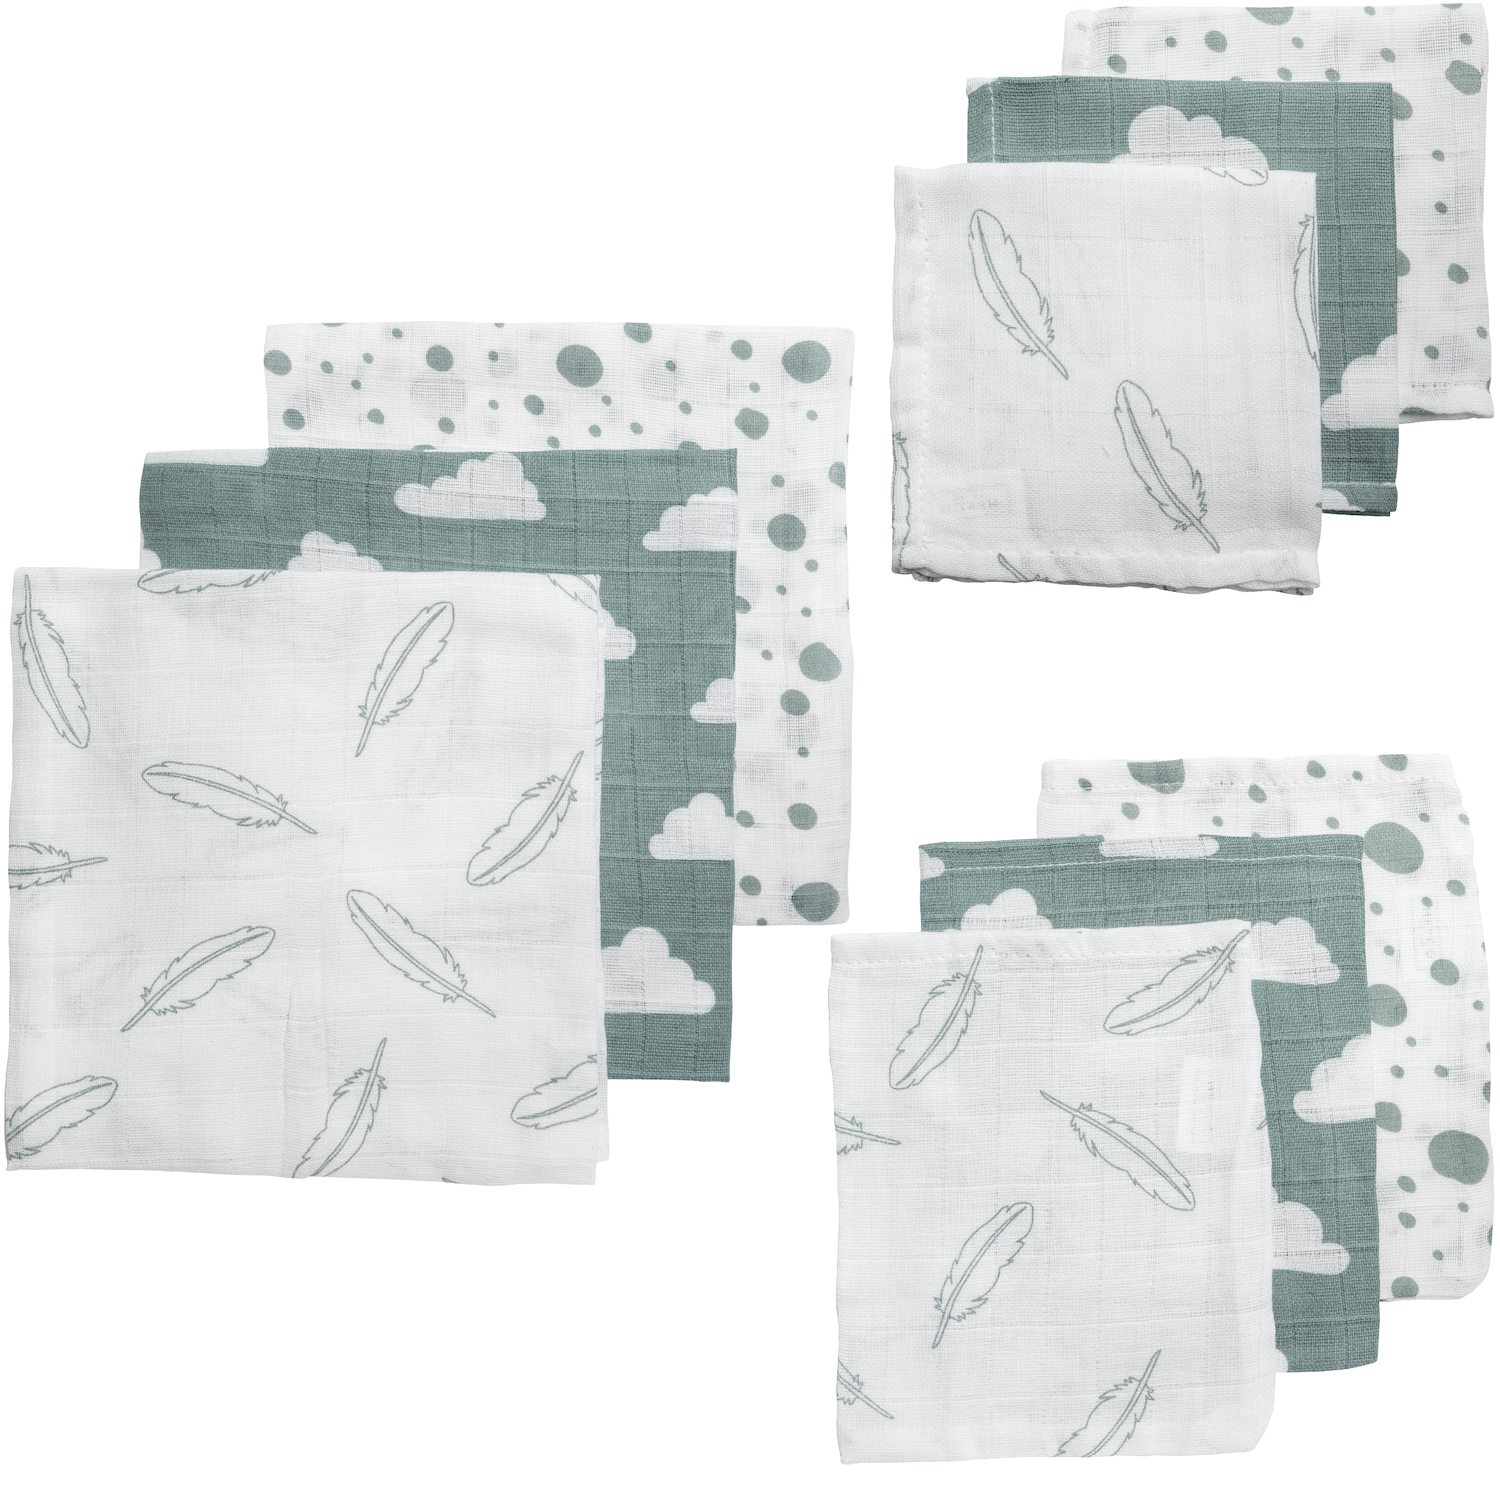 Starterset 9er pack musselin Clouds/Dots/Feathers - stone green